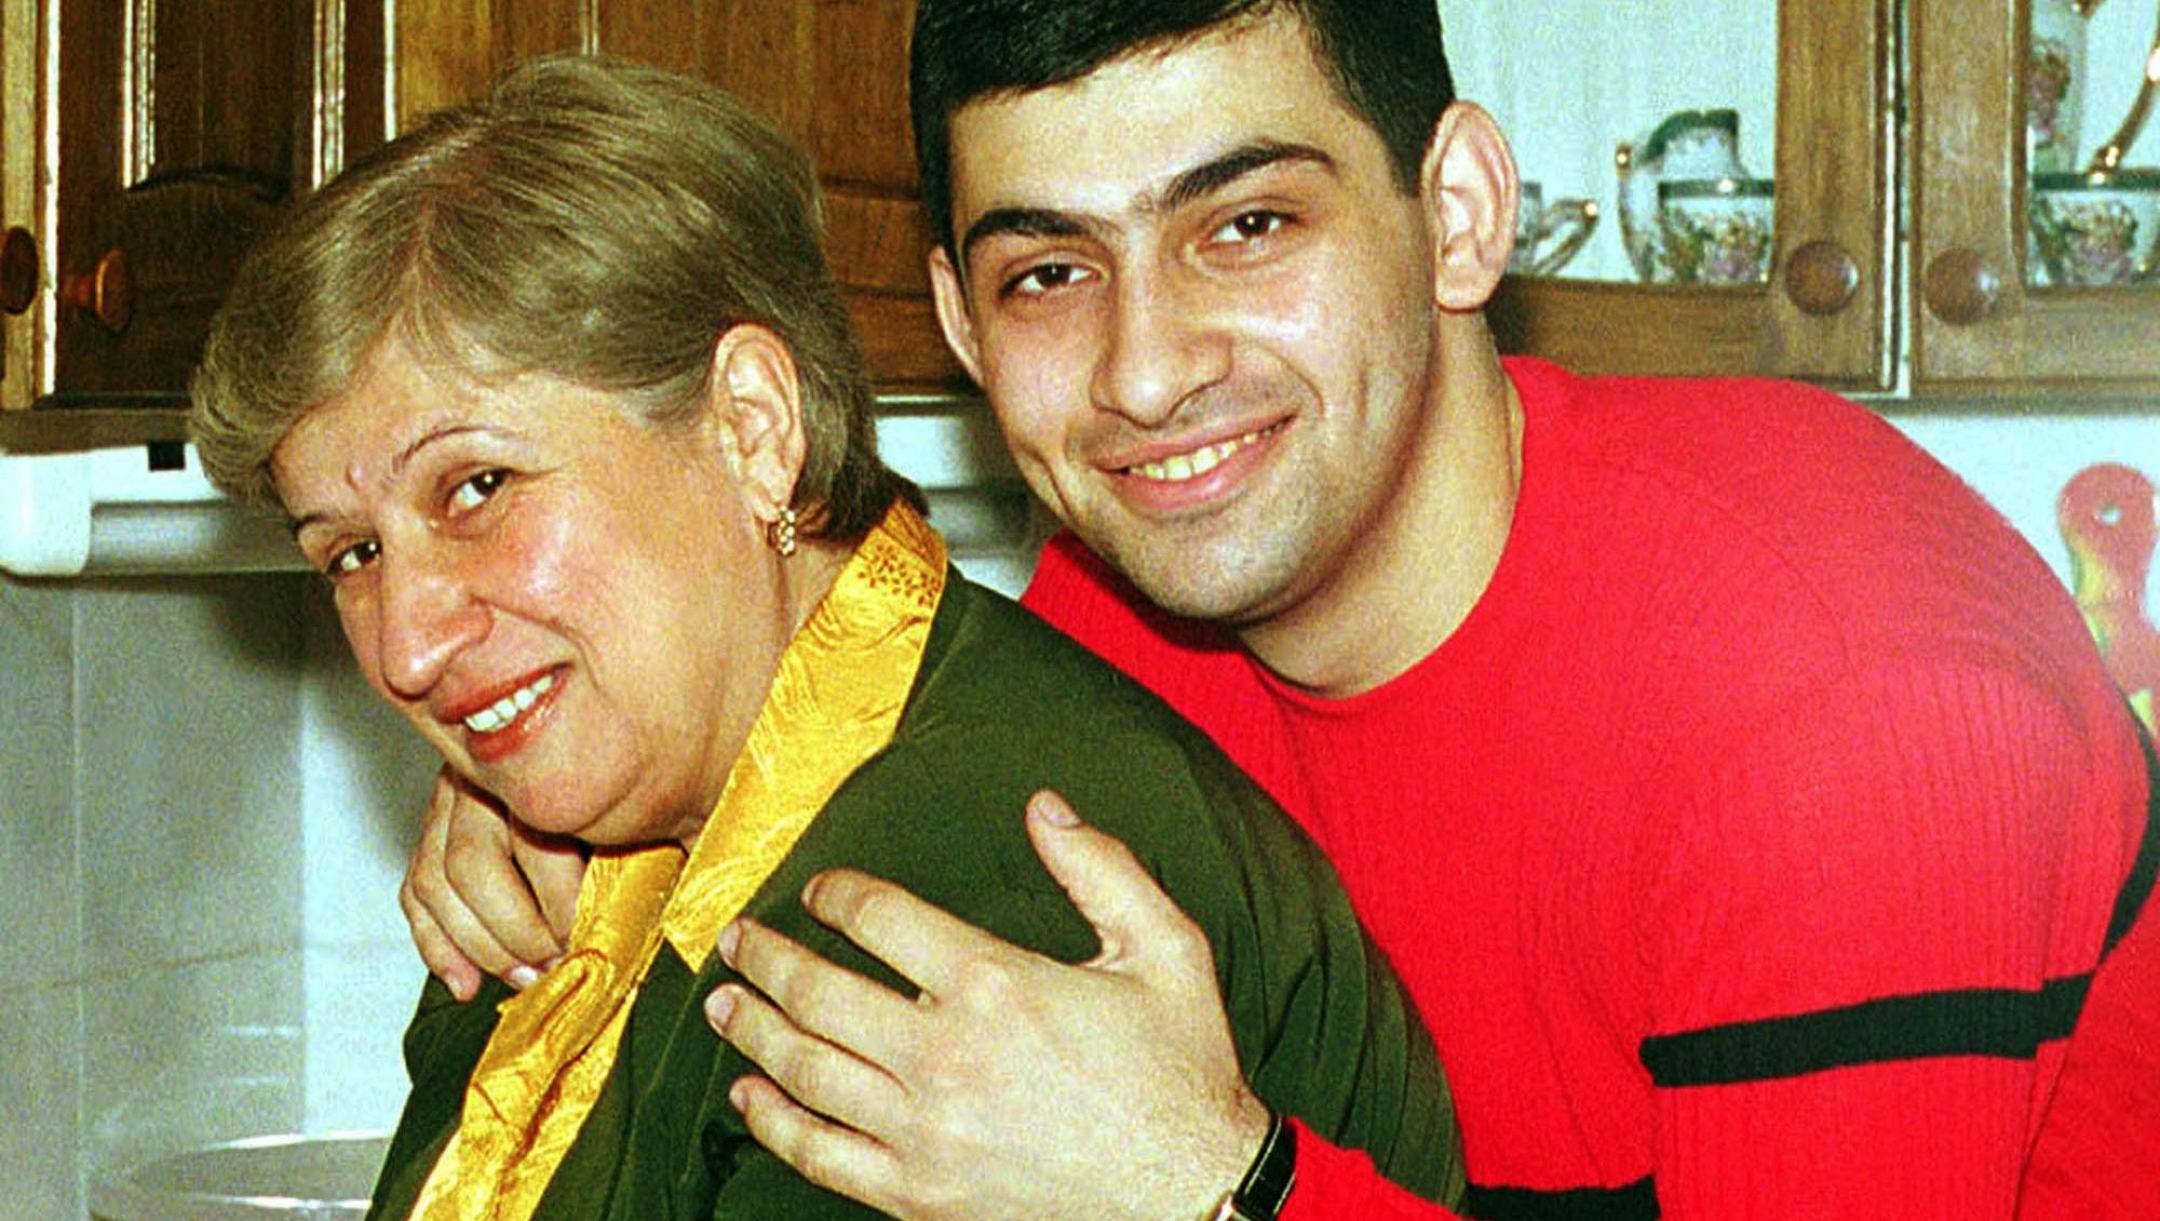 FILE--A family handout photo shows Levan Kaladze with his mother Medeya a few days before his kidnapping in Tbilisi, on  May 23 , 2001. Levan Kaladze, 20, brother of Kakha Kaladze, AC Milan's Georgian midfielder, was kidnapped on May 23. His kidnappers have reportedly demanded dlrs 600,000 for his freedom. (AP Photo) NO SALES